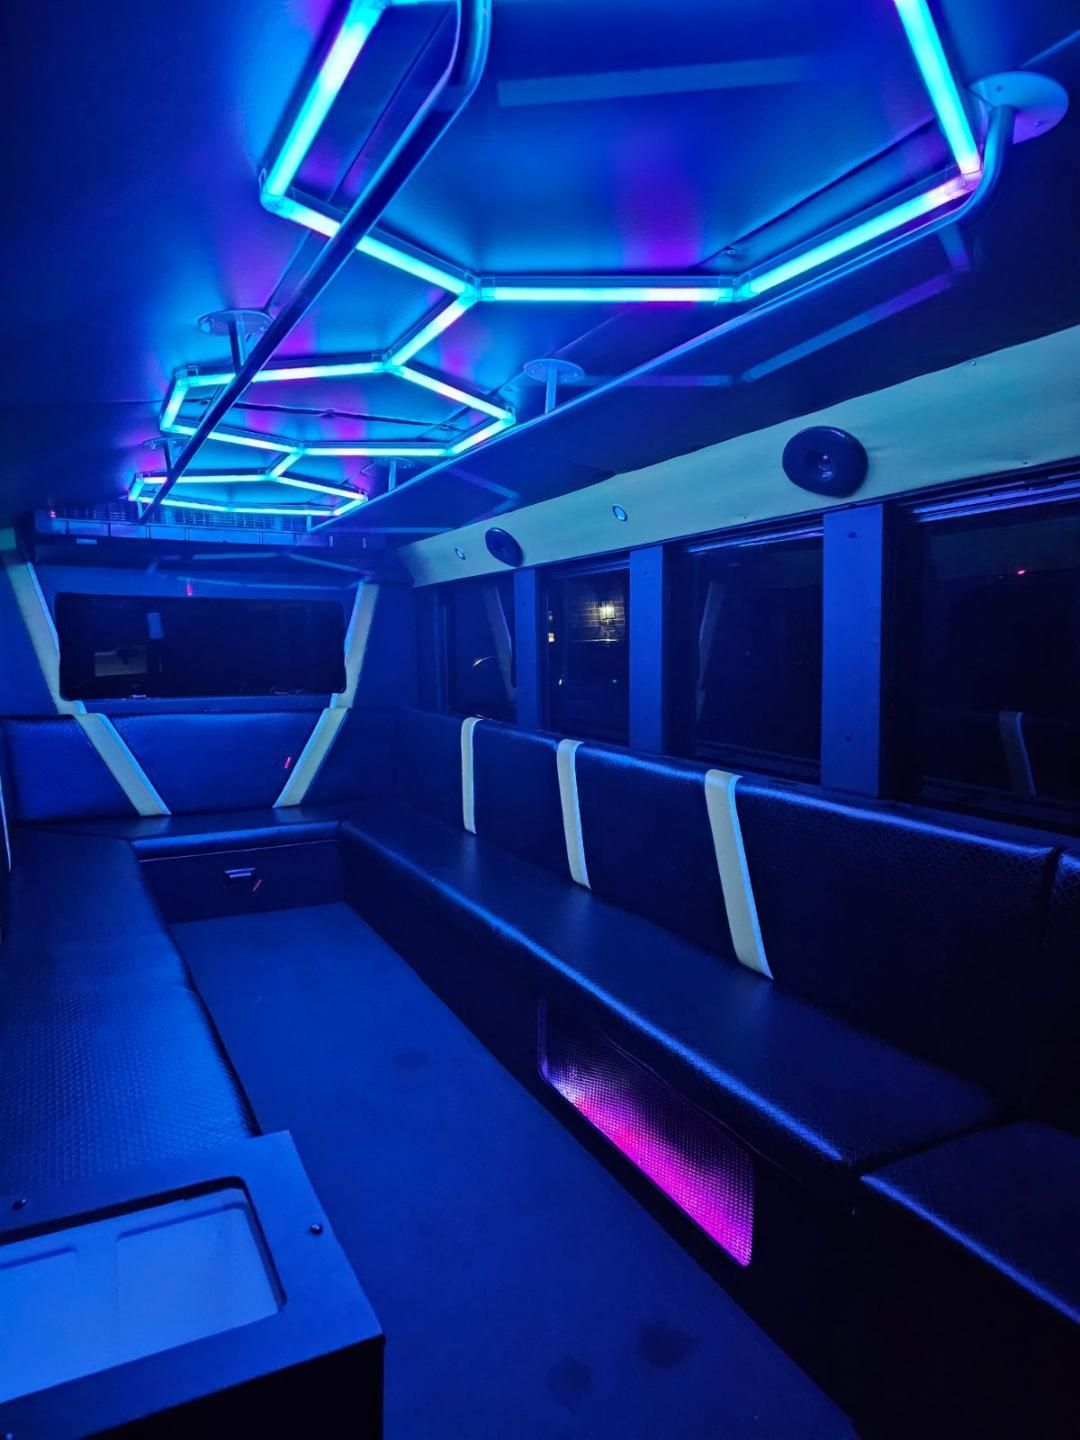 SATX Party Time Party Bus outside view wheelchair accessible inside view 22 passengers blue lights